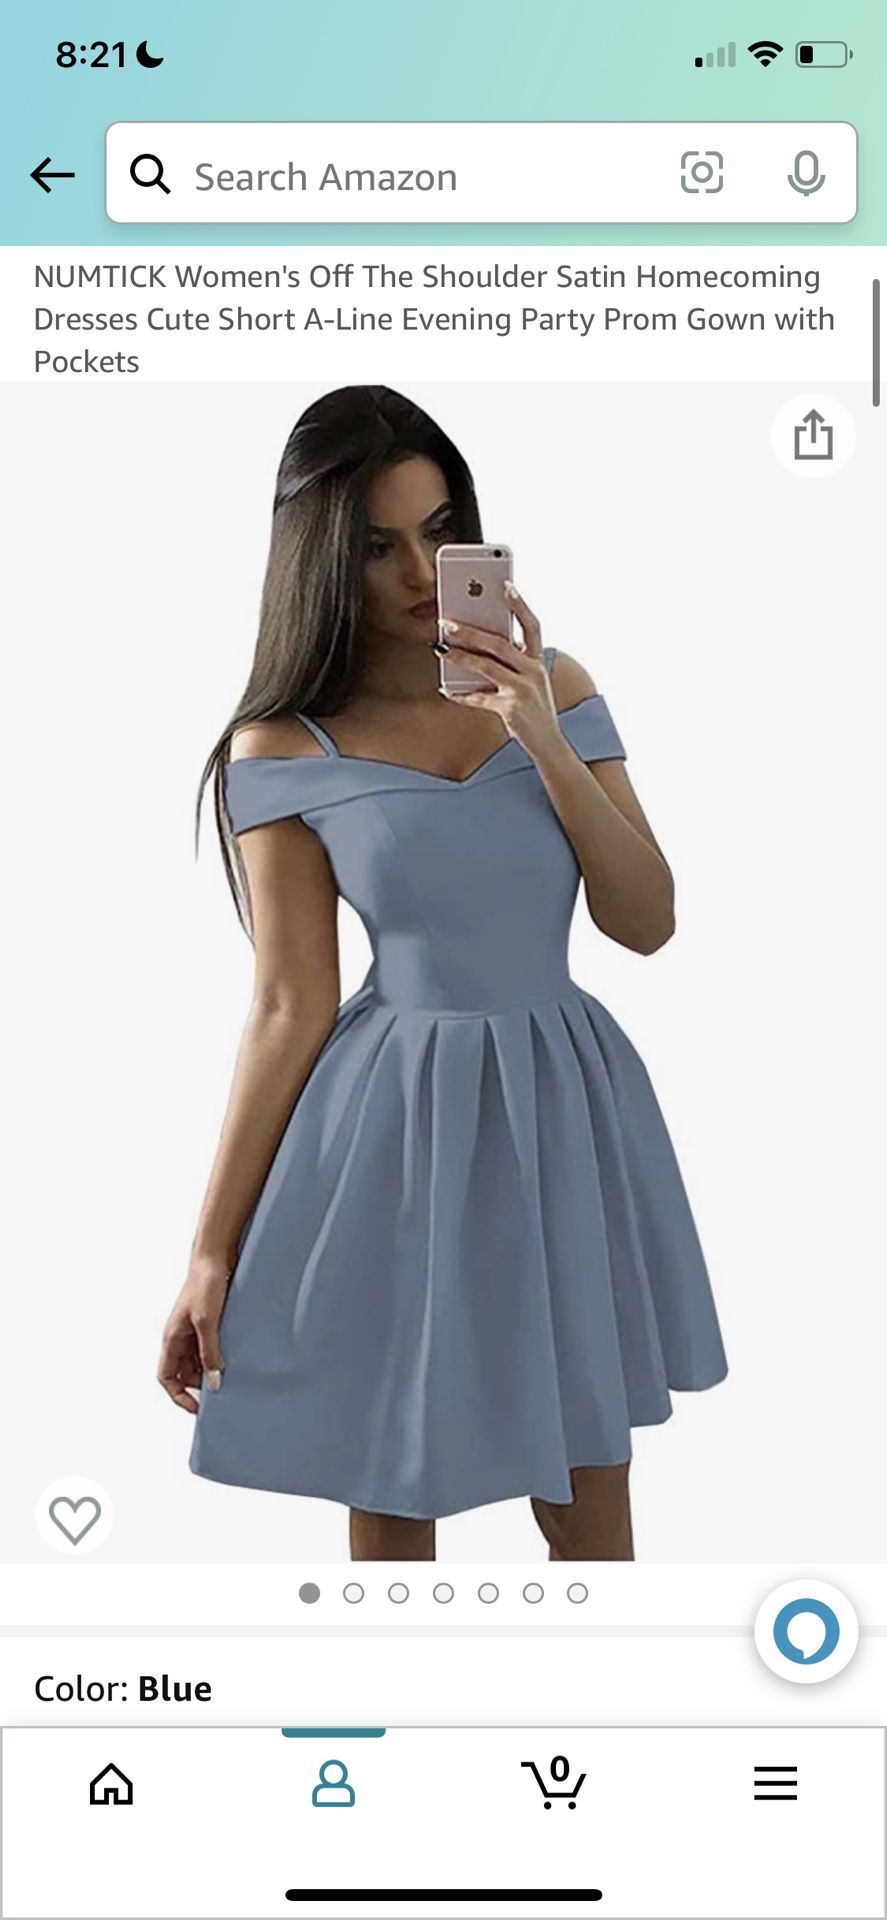 Off The Shoulder Satin Homecoming Dresses Cute Short A-Line Evening Party Prom Gown with Pockets